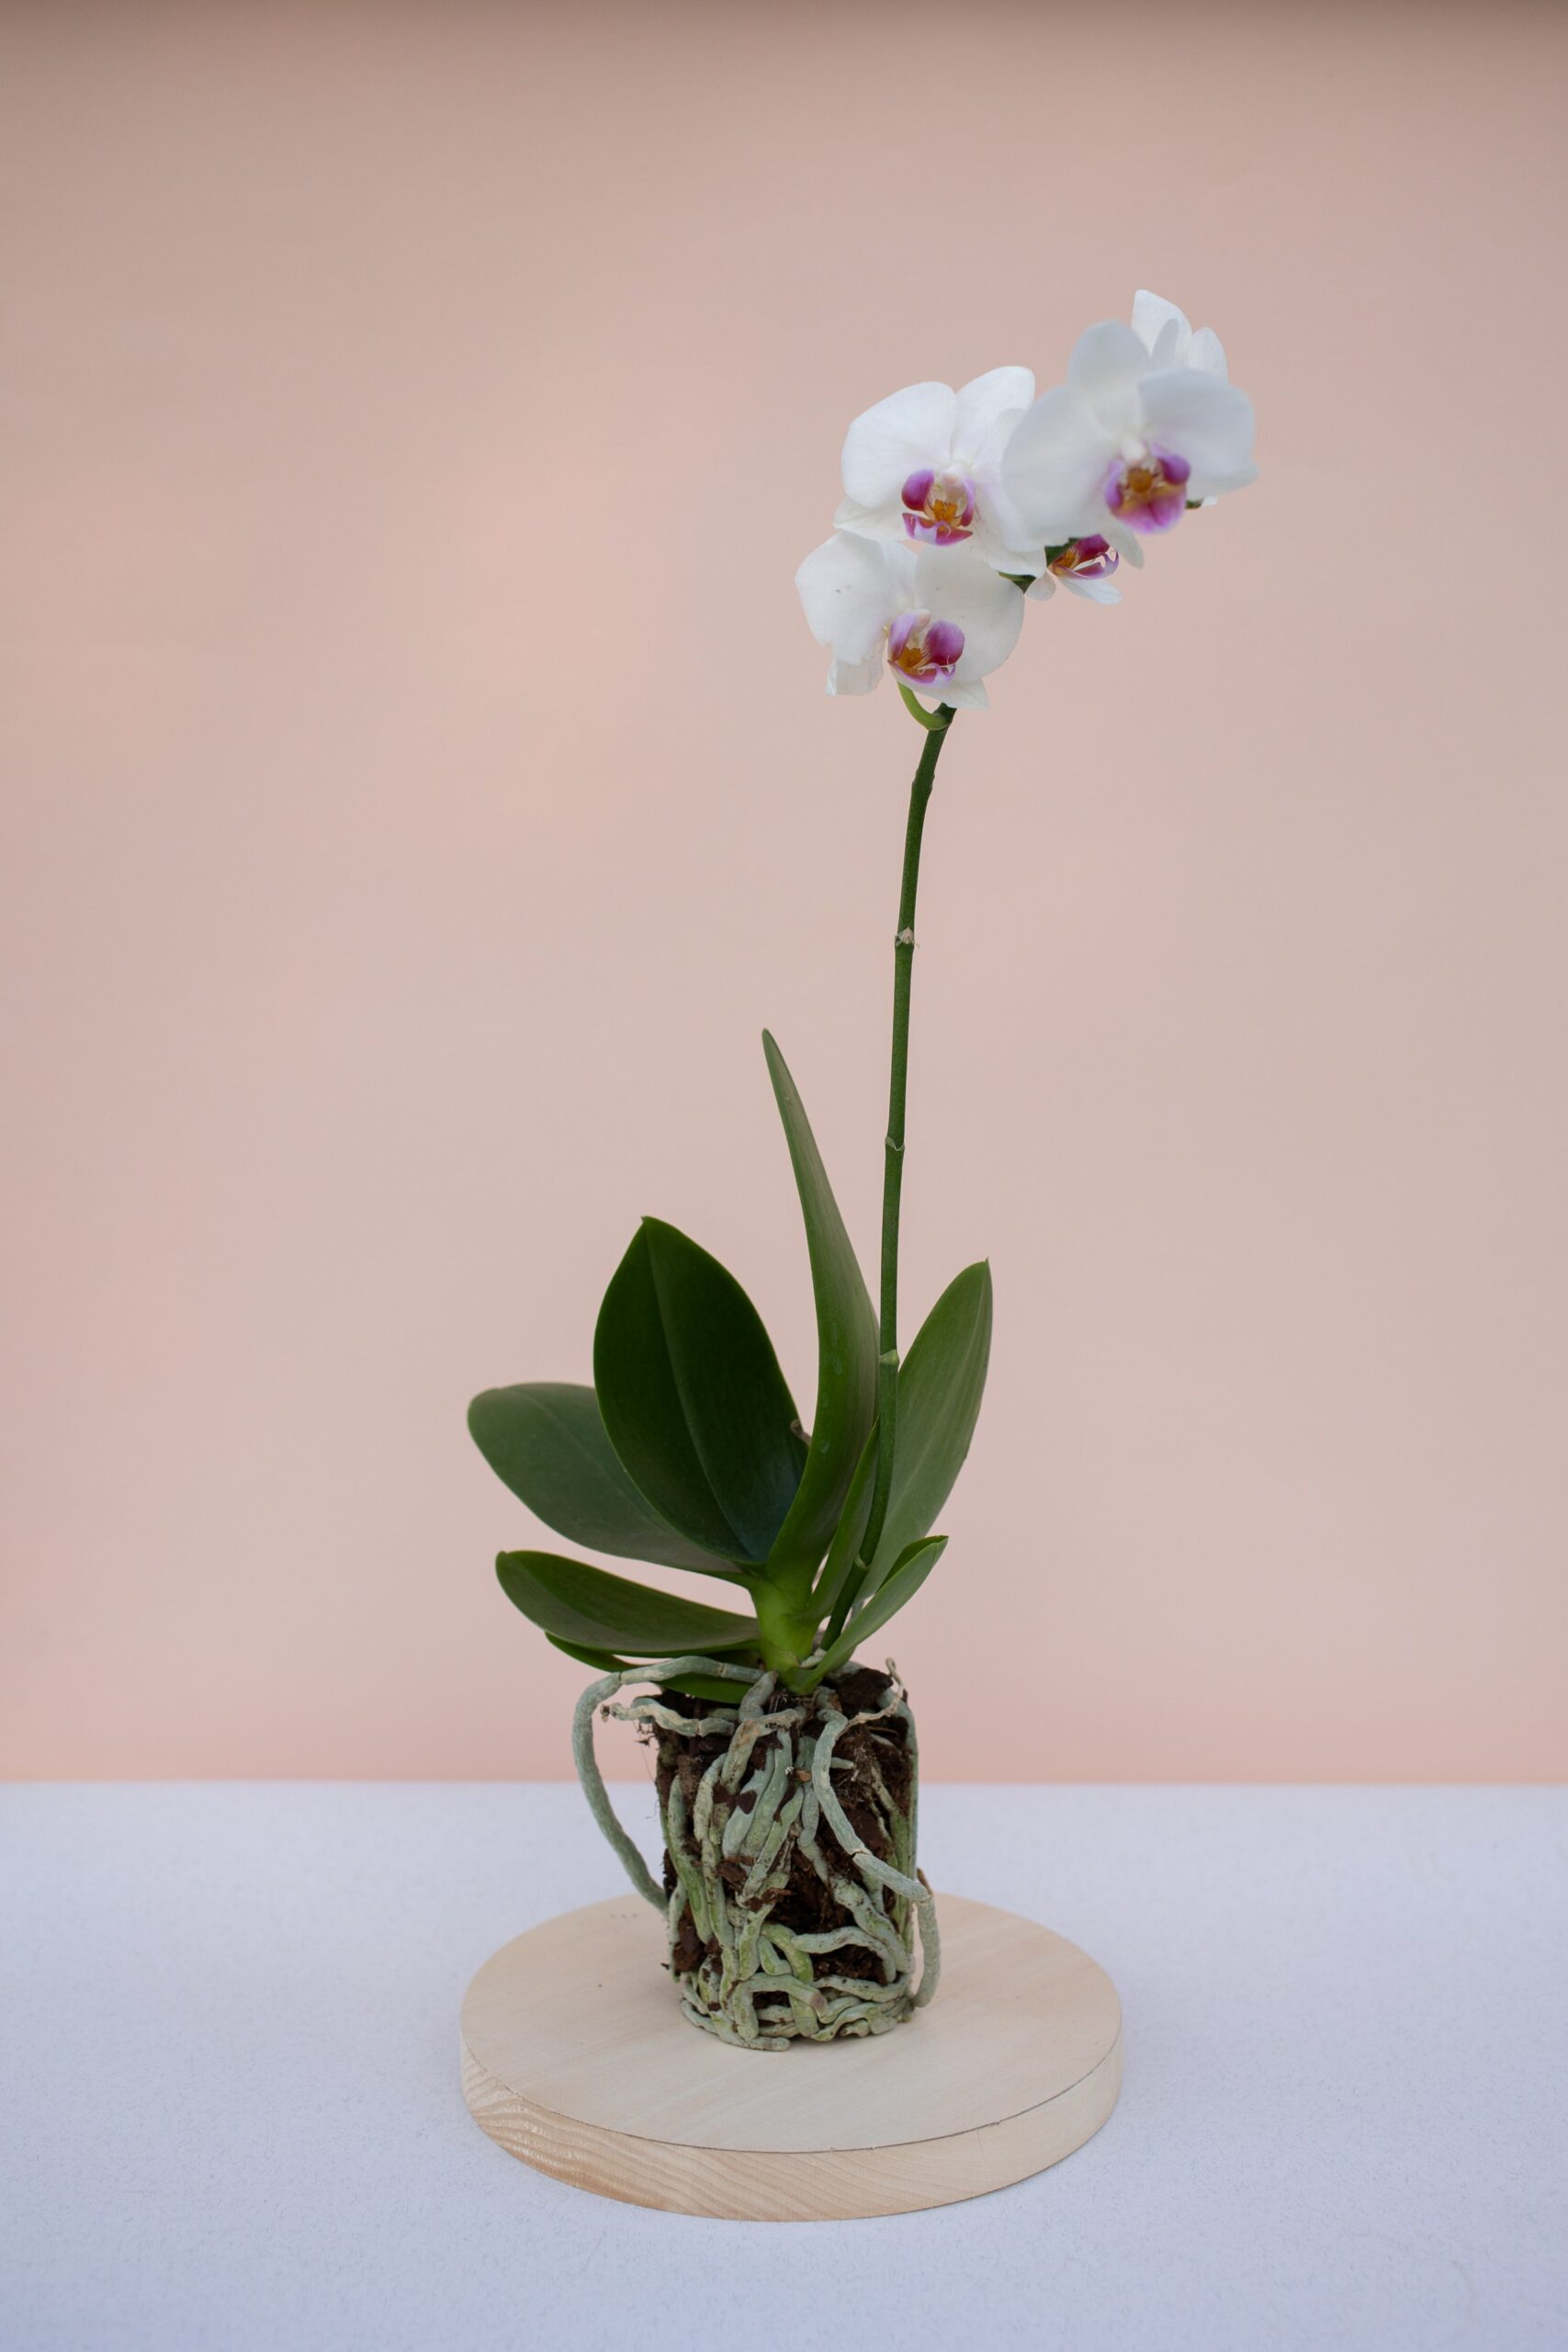 Identifying whether a flower has single or double spiked blooms determines how to prune and care for your orchids